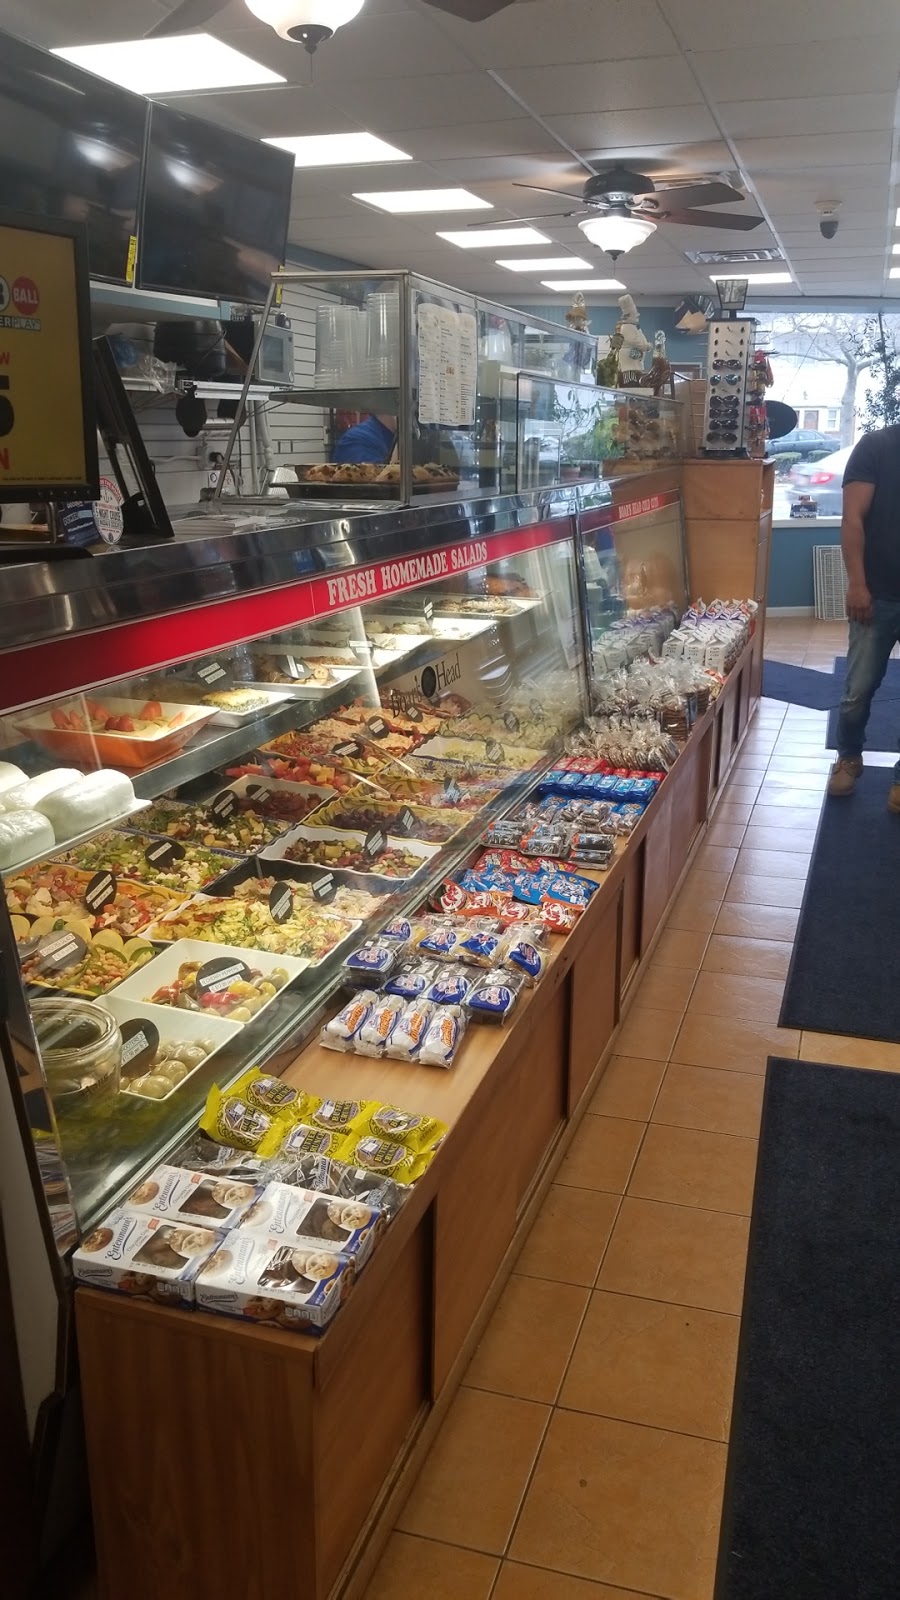 Dunes Deli and Catering | 300 Lido Blvd, Lido Beach, NY 11561 | Phone: (516) 432-2736